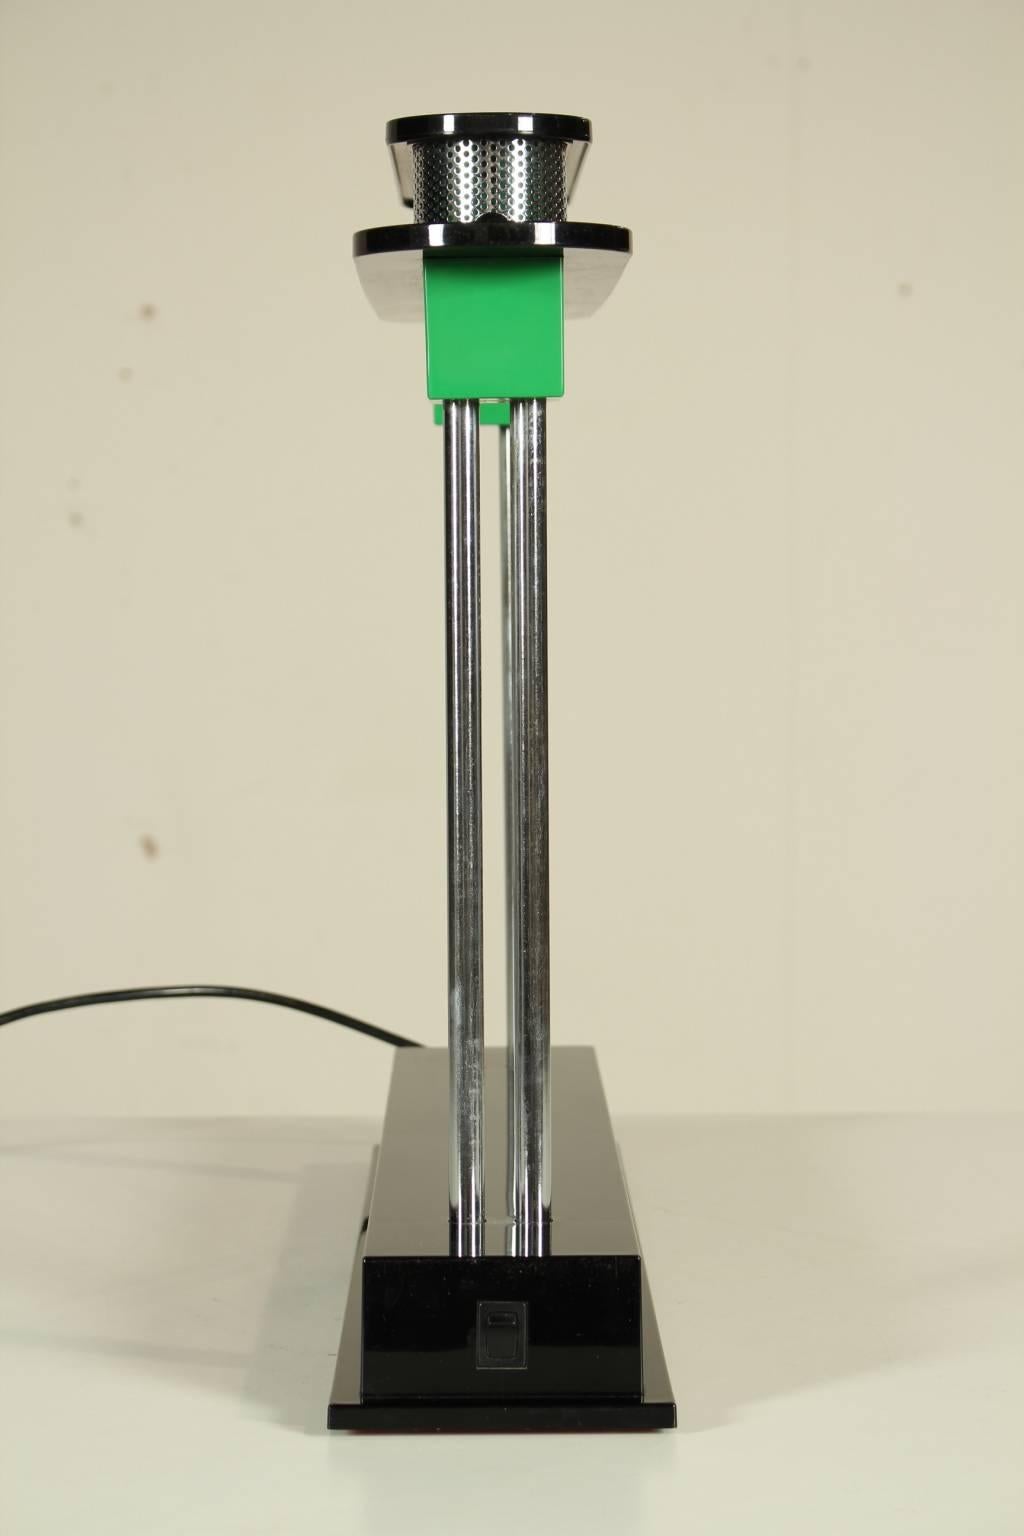 'Pausanias' table lamp by Ettore Sottsass Jr for Artemide with green methacrylate diffuser. It includes a S 11W fluorescent dulux bulb.